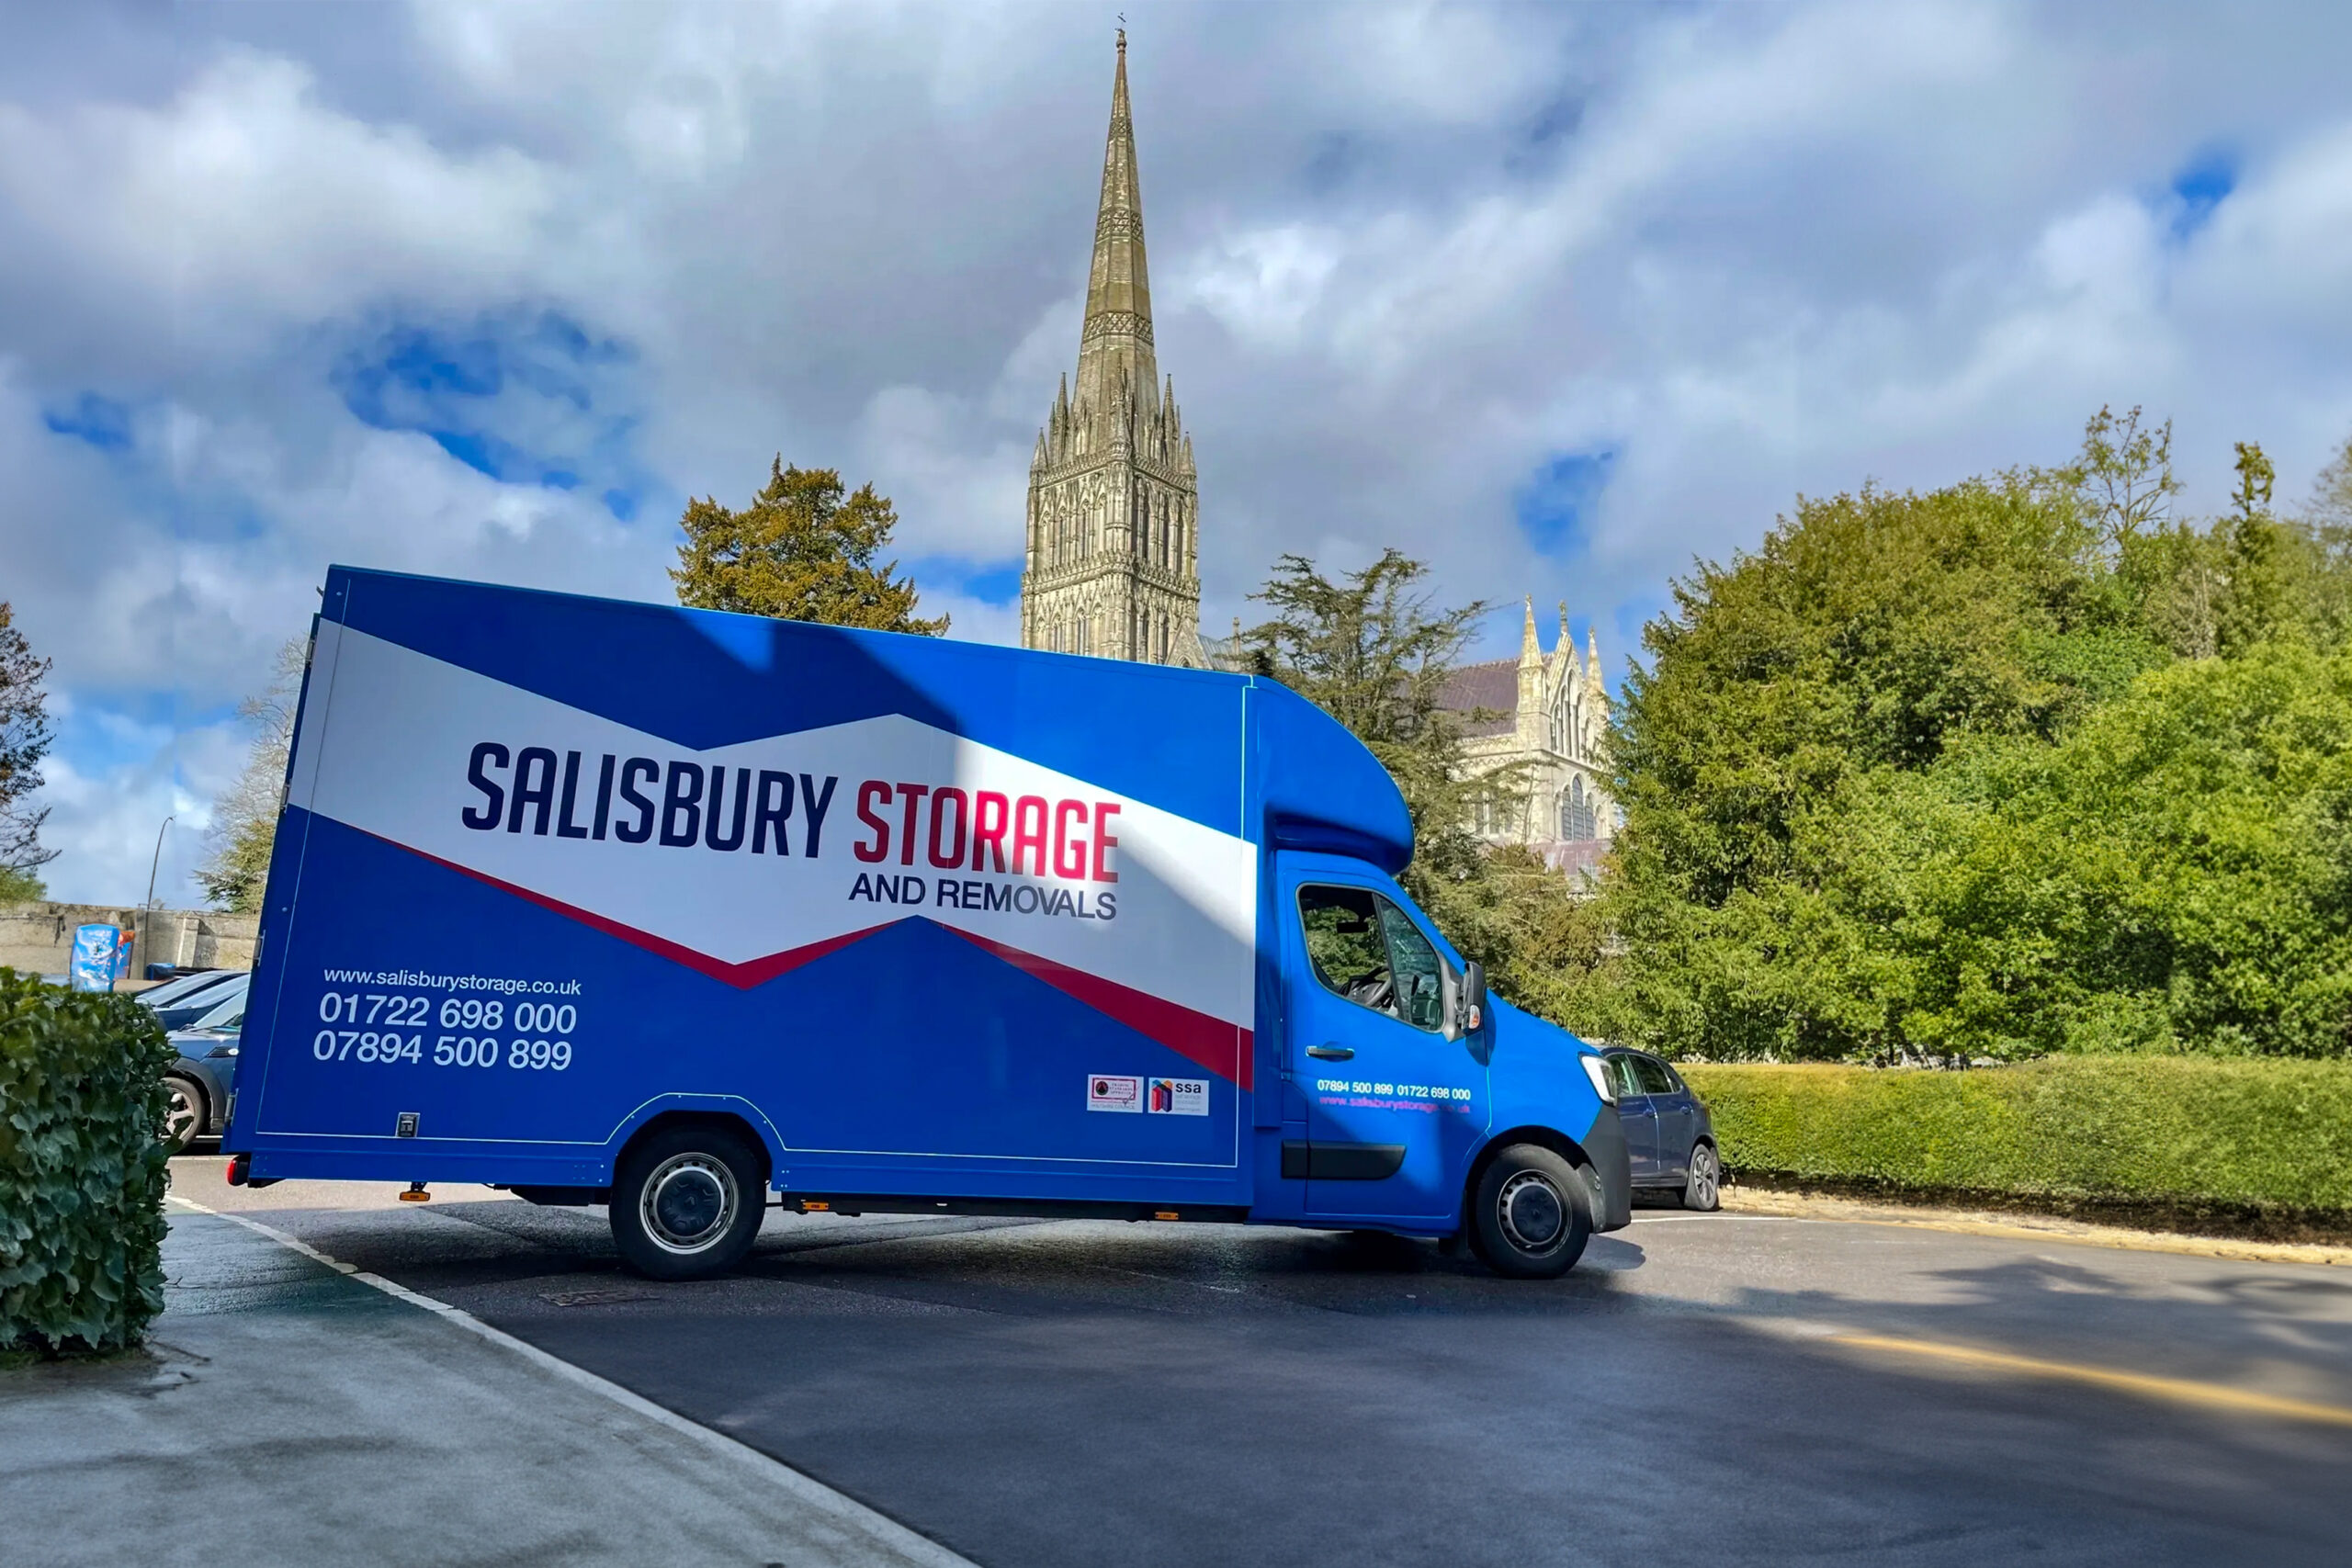 Salisbury and removals and storage van in a car park with salisbury cathedral in the background.